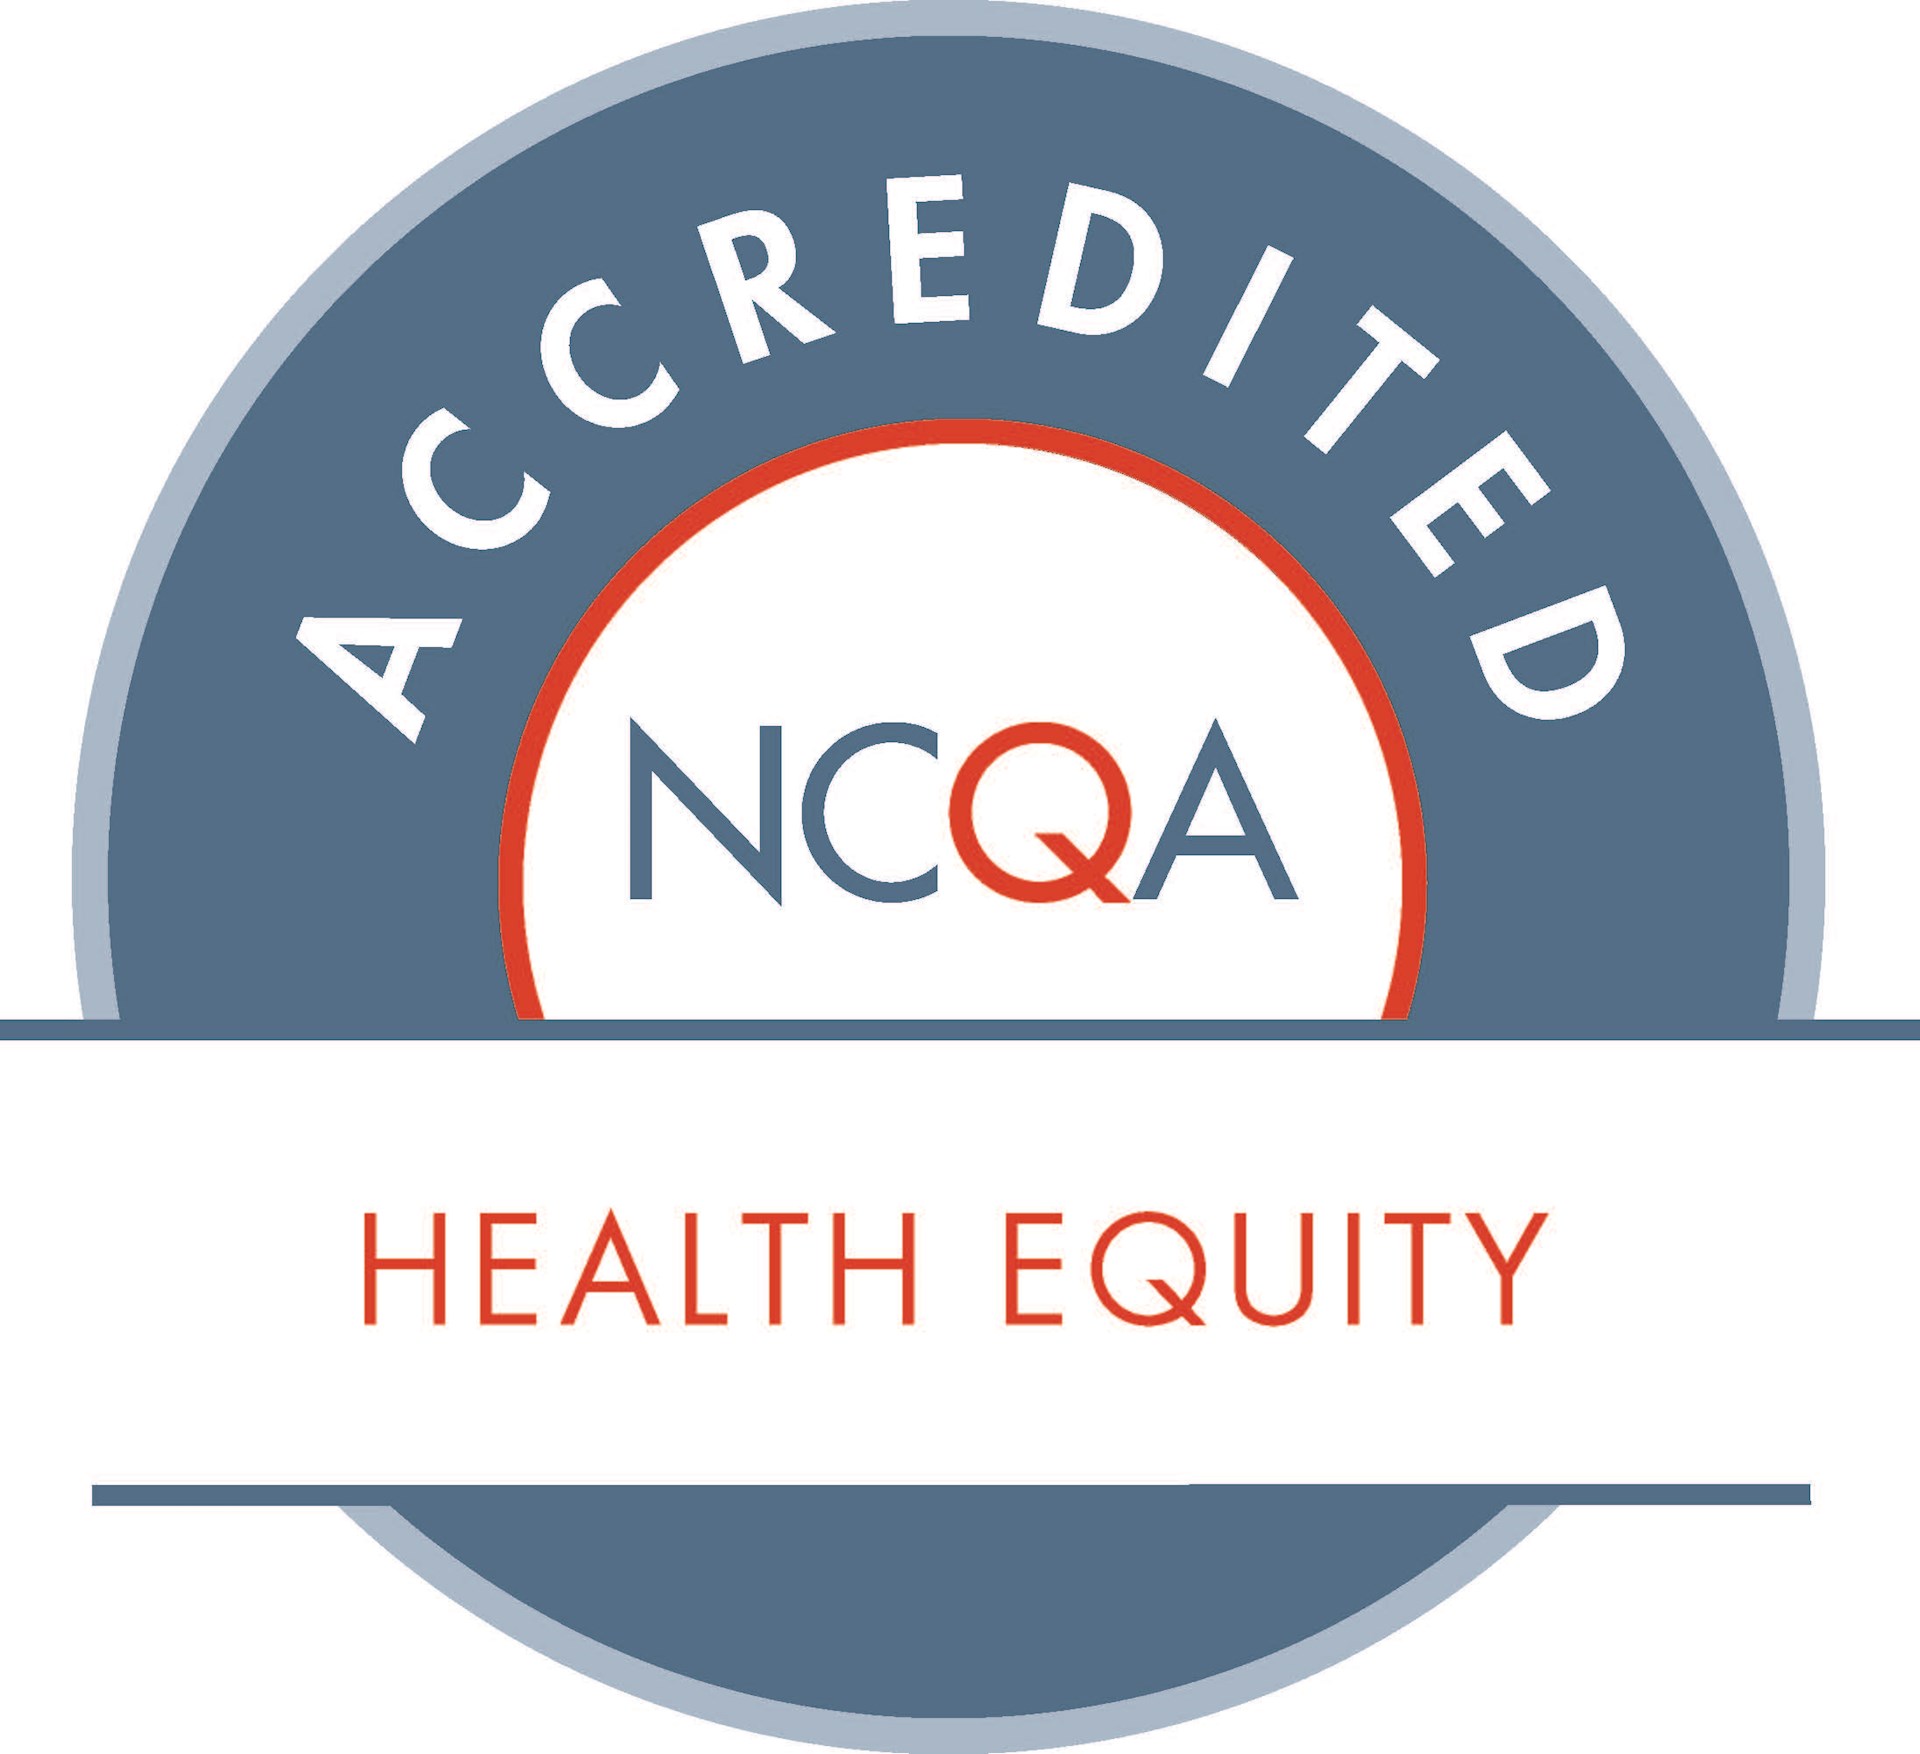 WellSpan Health the first health system in Pennsylvania to earn NCQA Health Equity Accreditation